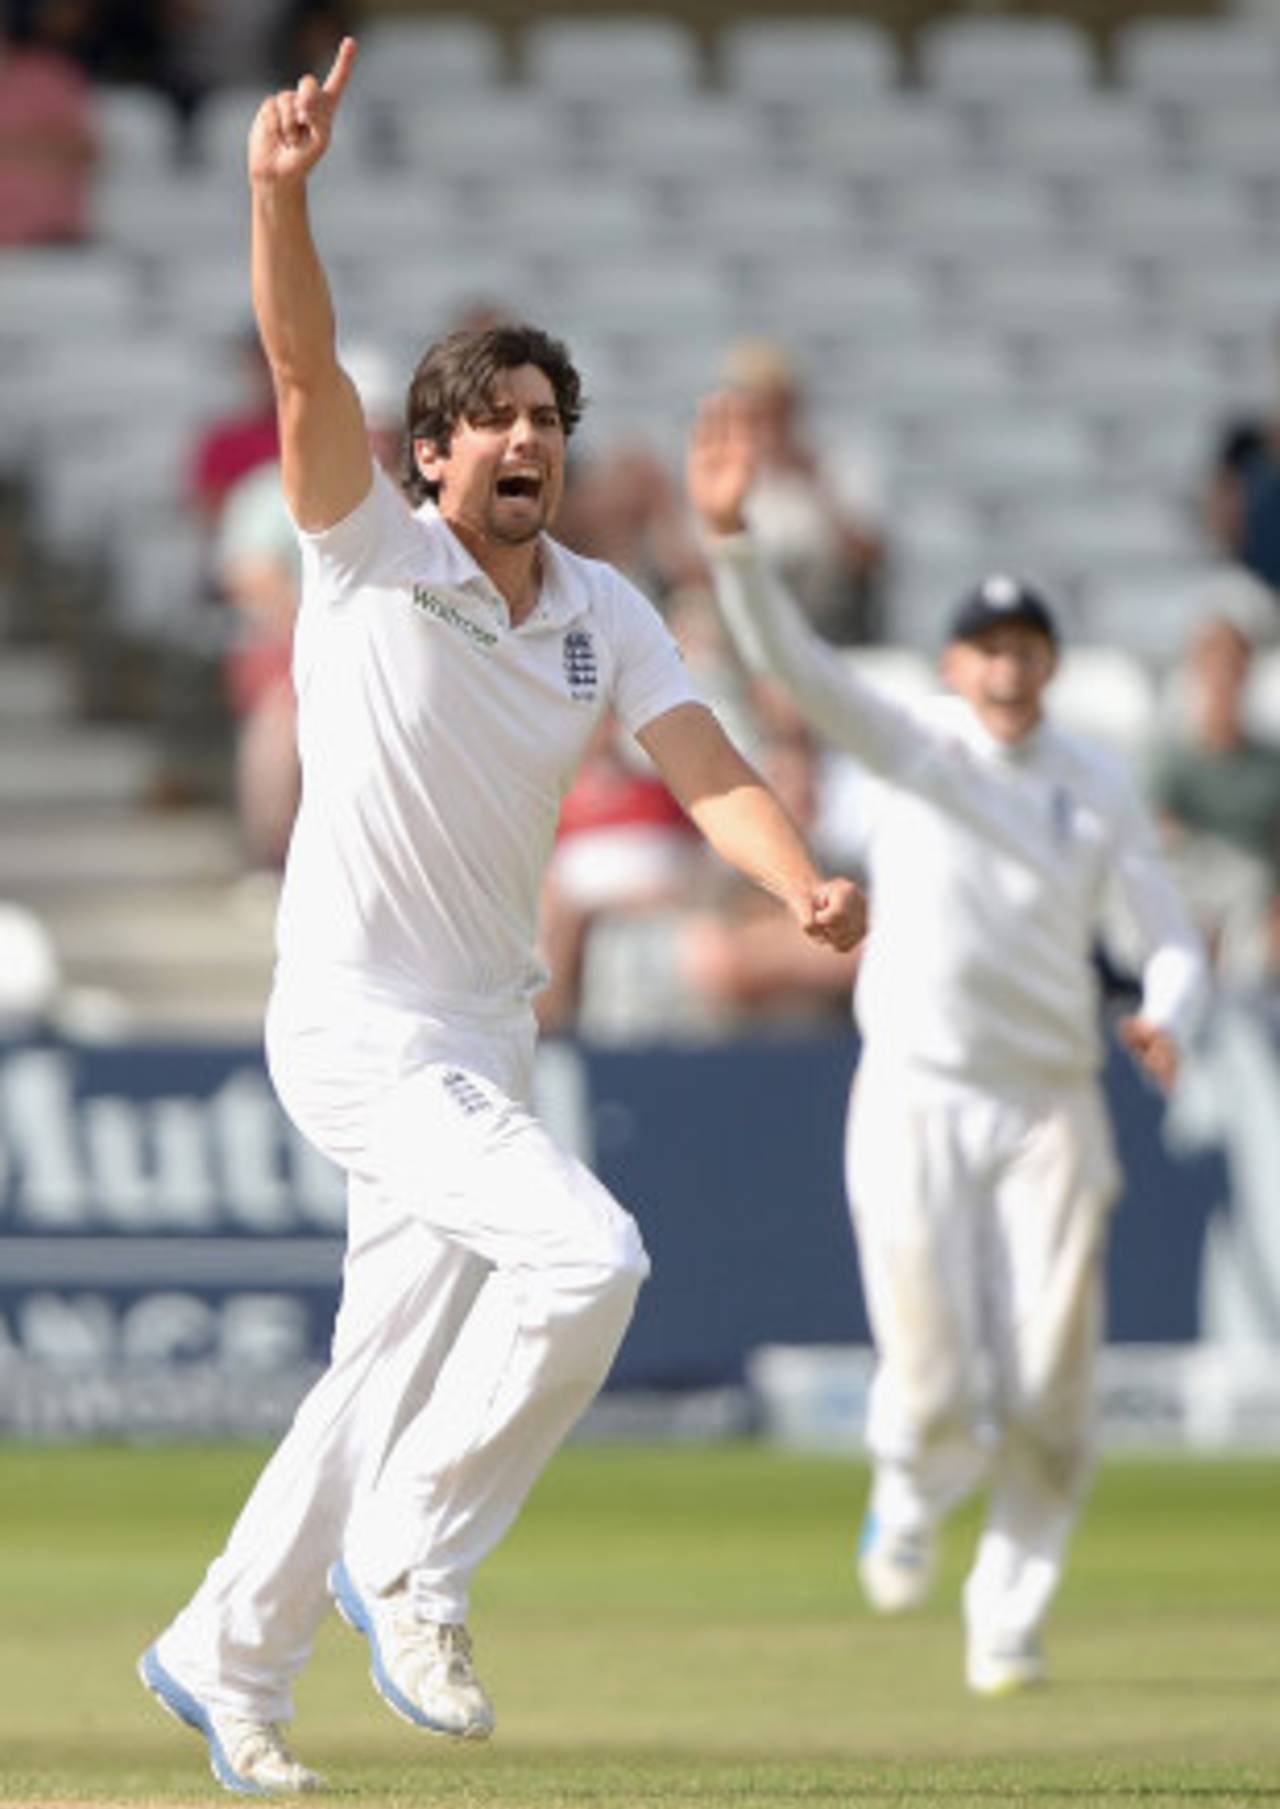 Alastair Cook enjoyed a happy match which culminated in a first Test wicket&nbsp;&nbsp;&bull;&nbsp;&nbsp;Getty Images